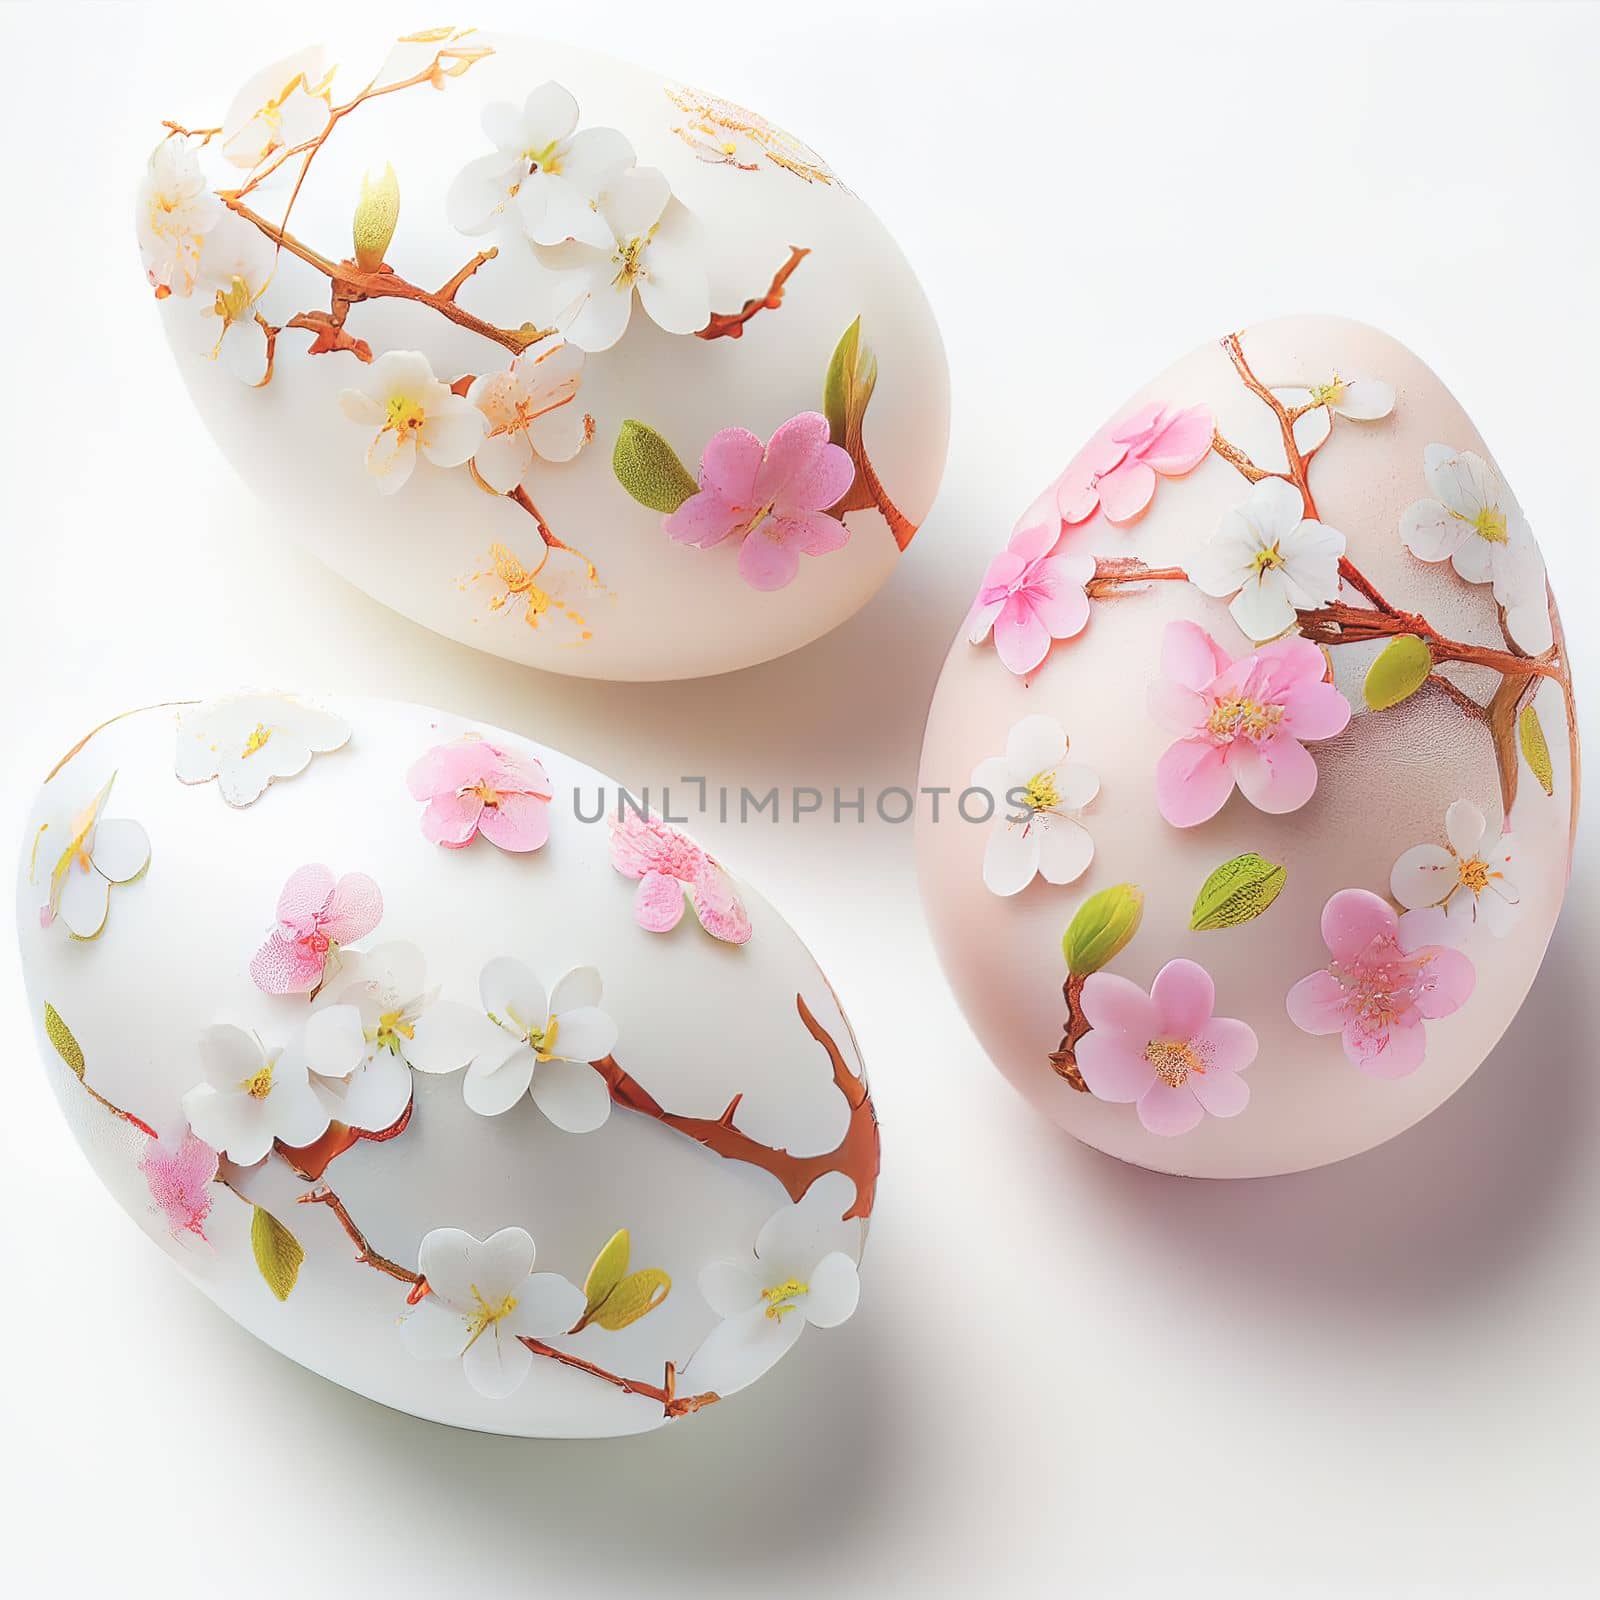 Colorful Easter eggs with cherry blossoms on white background. Design for Easter day. by FokasuArt